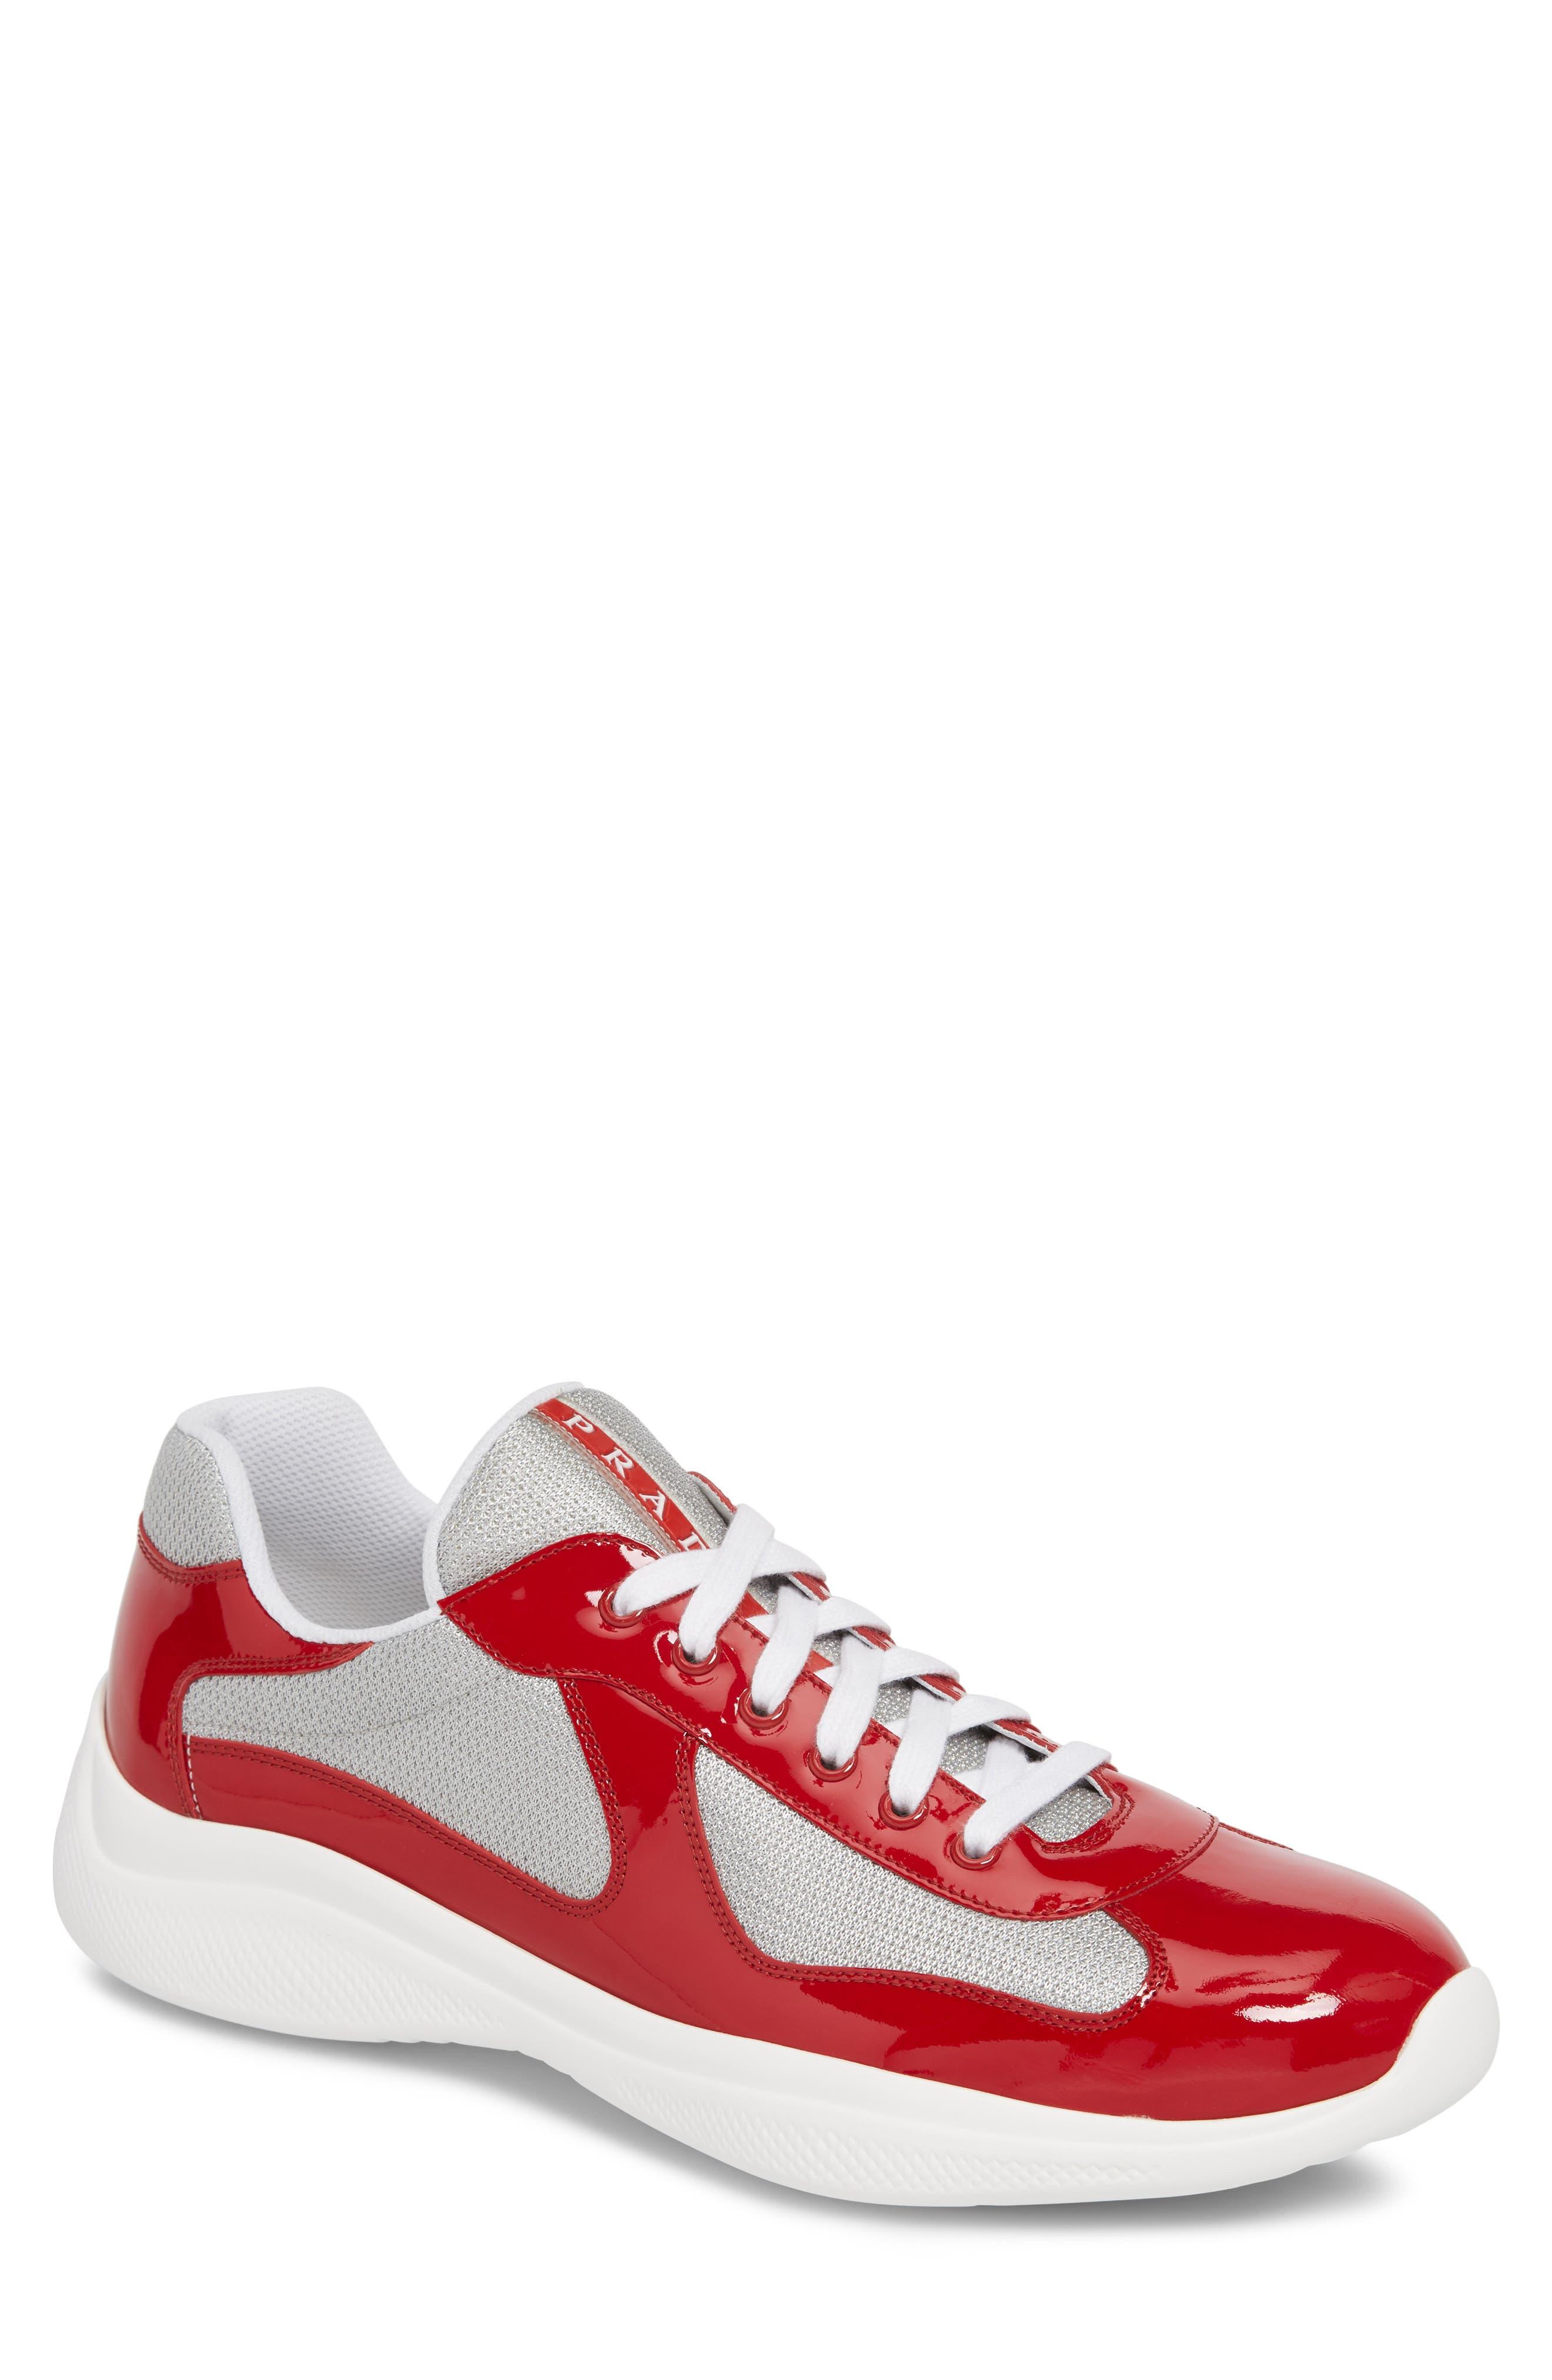 Prada Men's Shoes Leather Trainers Sneakers in Red for Men - Save 64% - Lyst